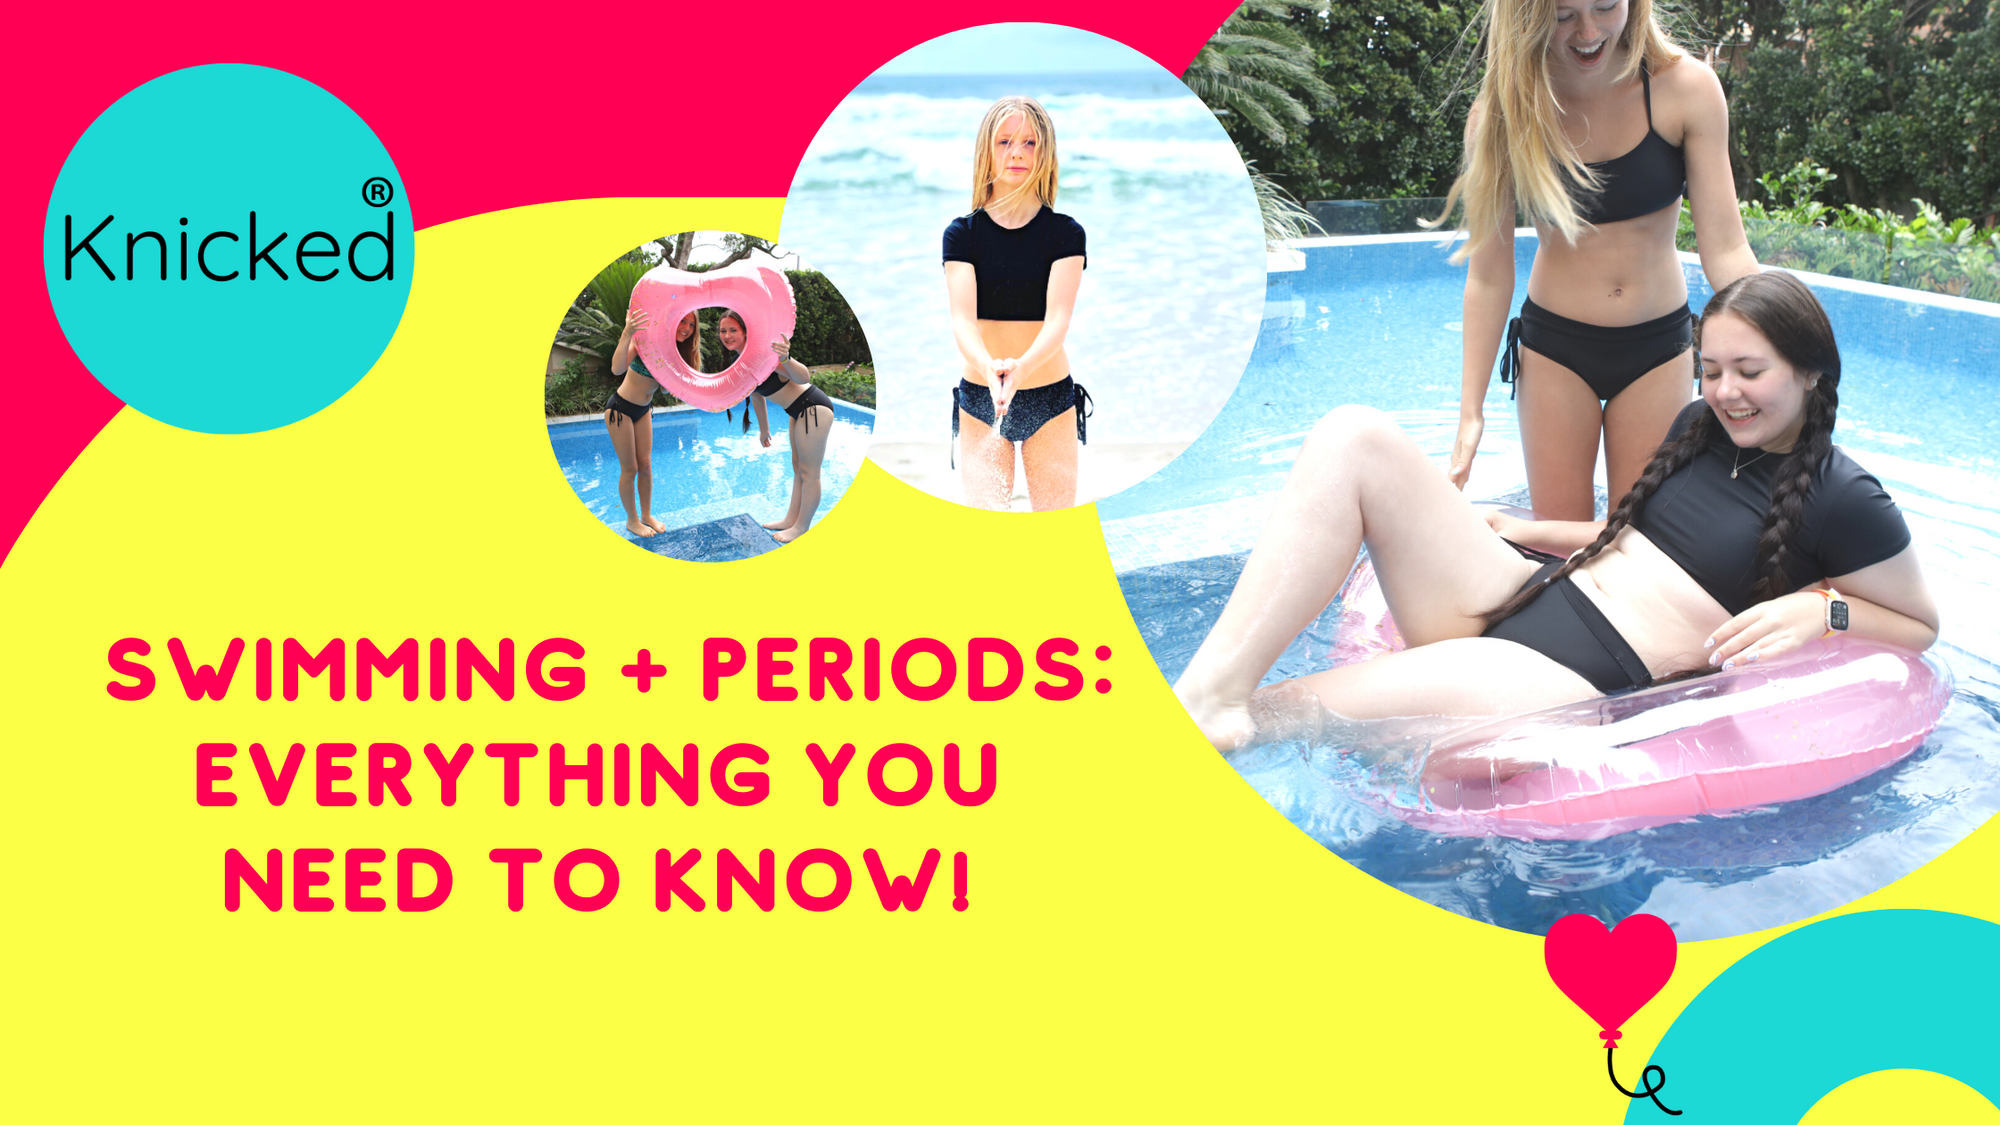 Talisi - Swimming during your period isn't a problem. However, you